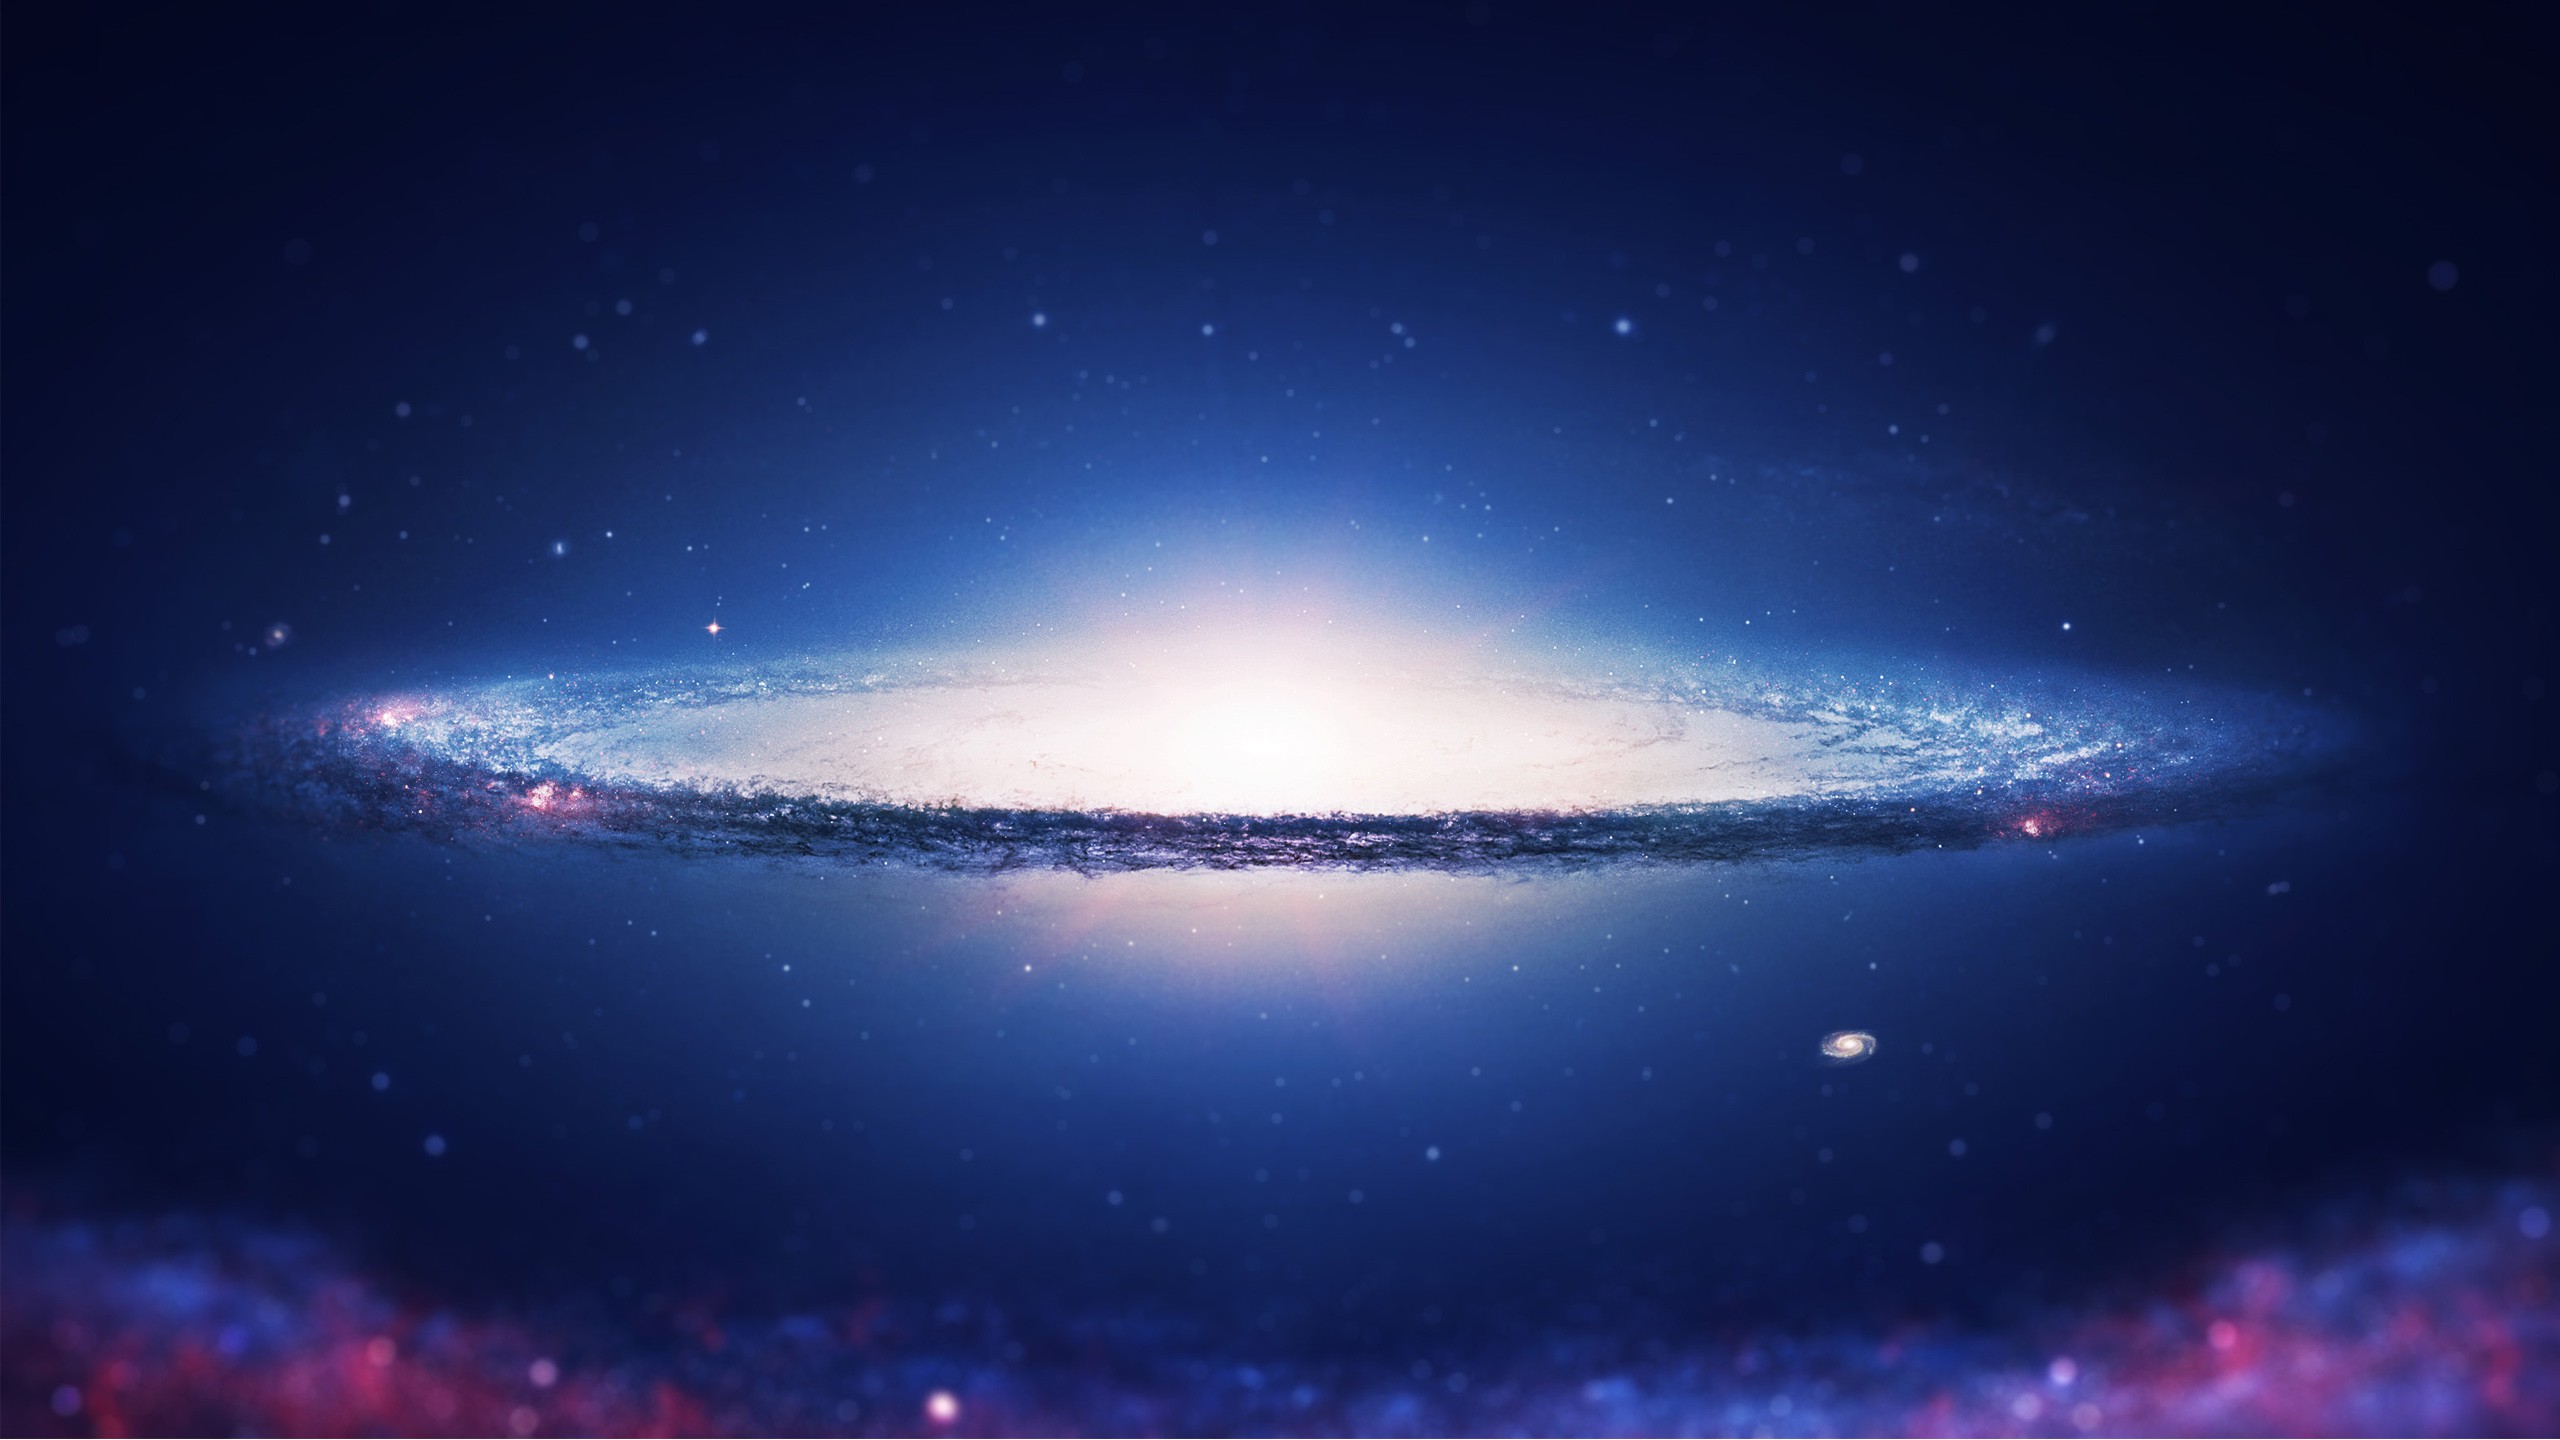 hd wallpapers 1440 x 2560,sky,atmosphere,outer space,galaxy,horizon